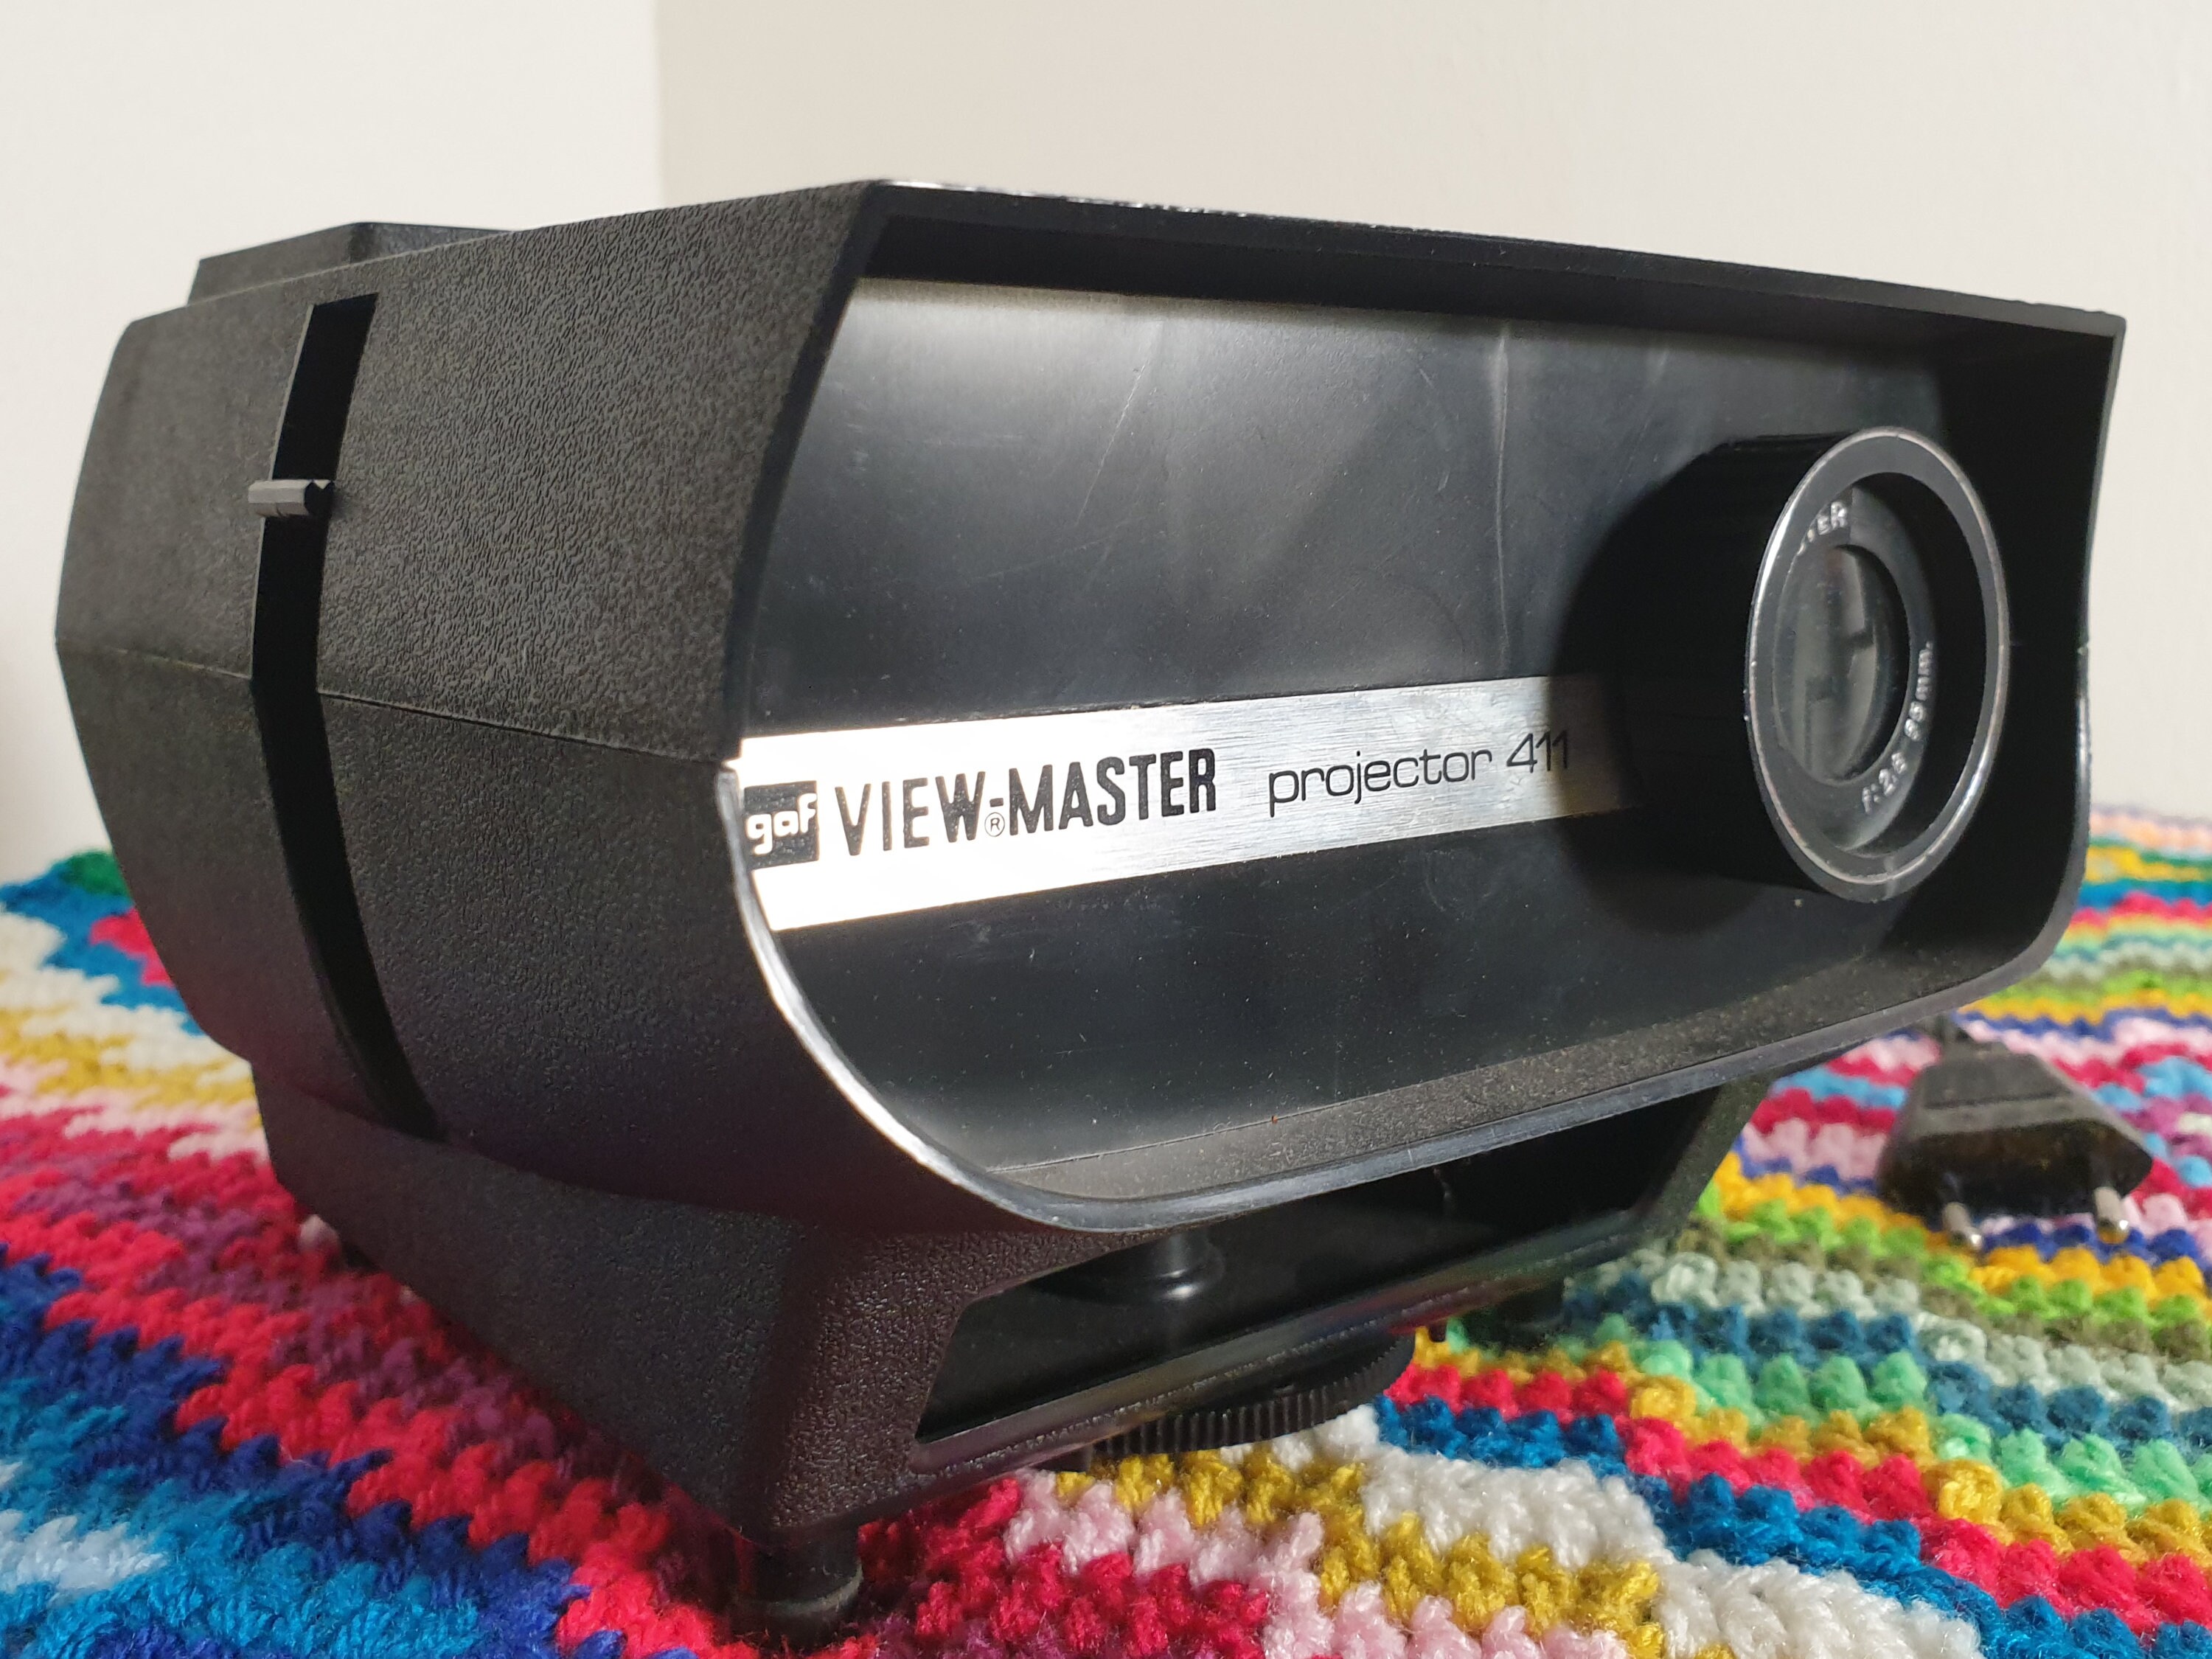 GAF View-master Projector 411 